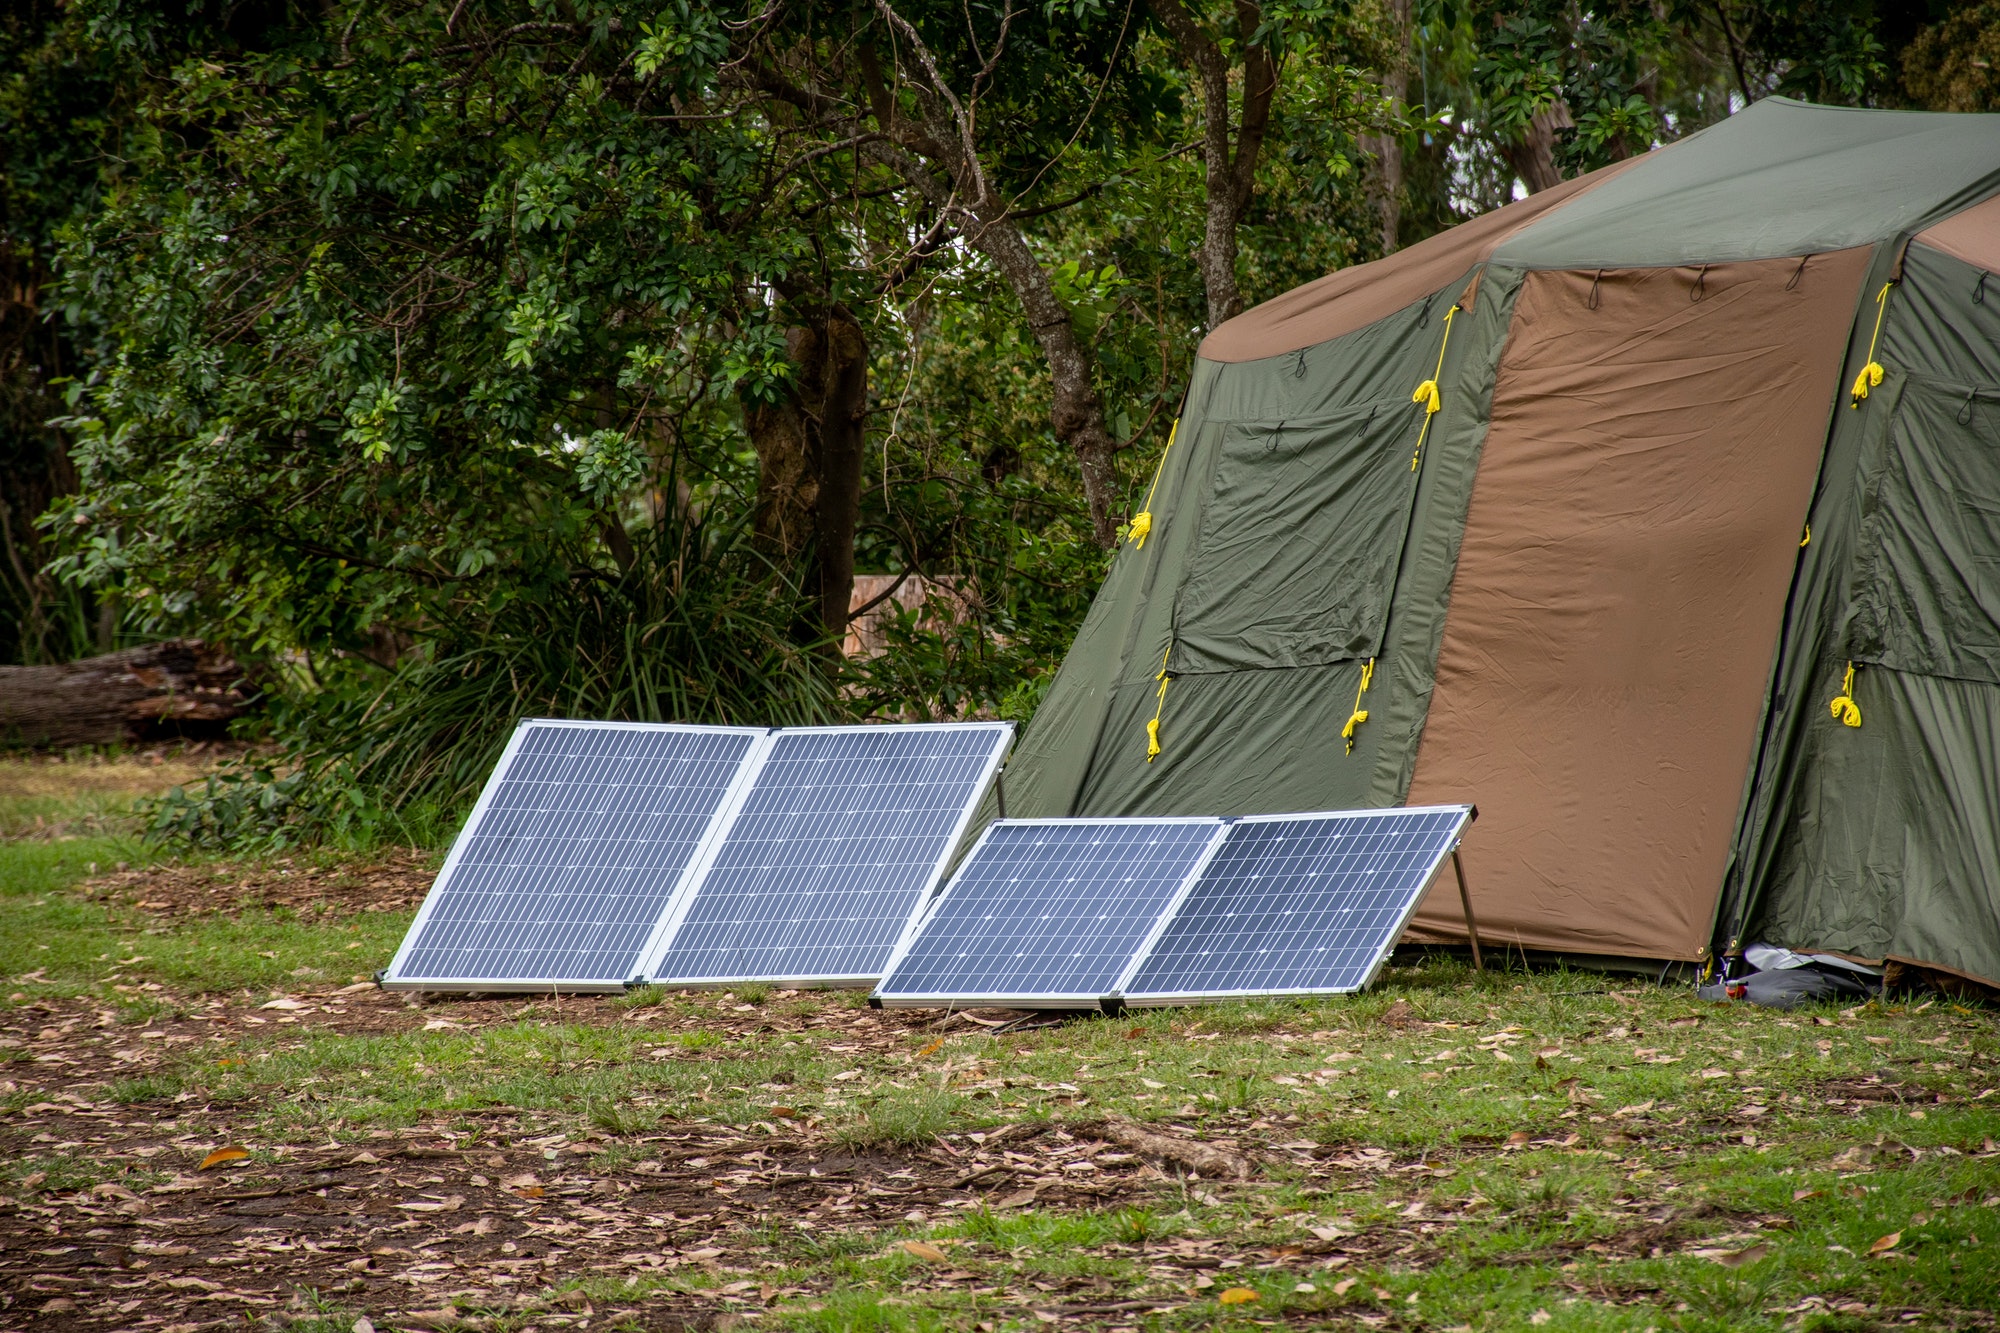 Camping with solar panels. Portable foldable solar panels near the tent.